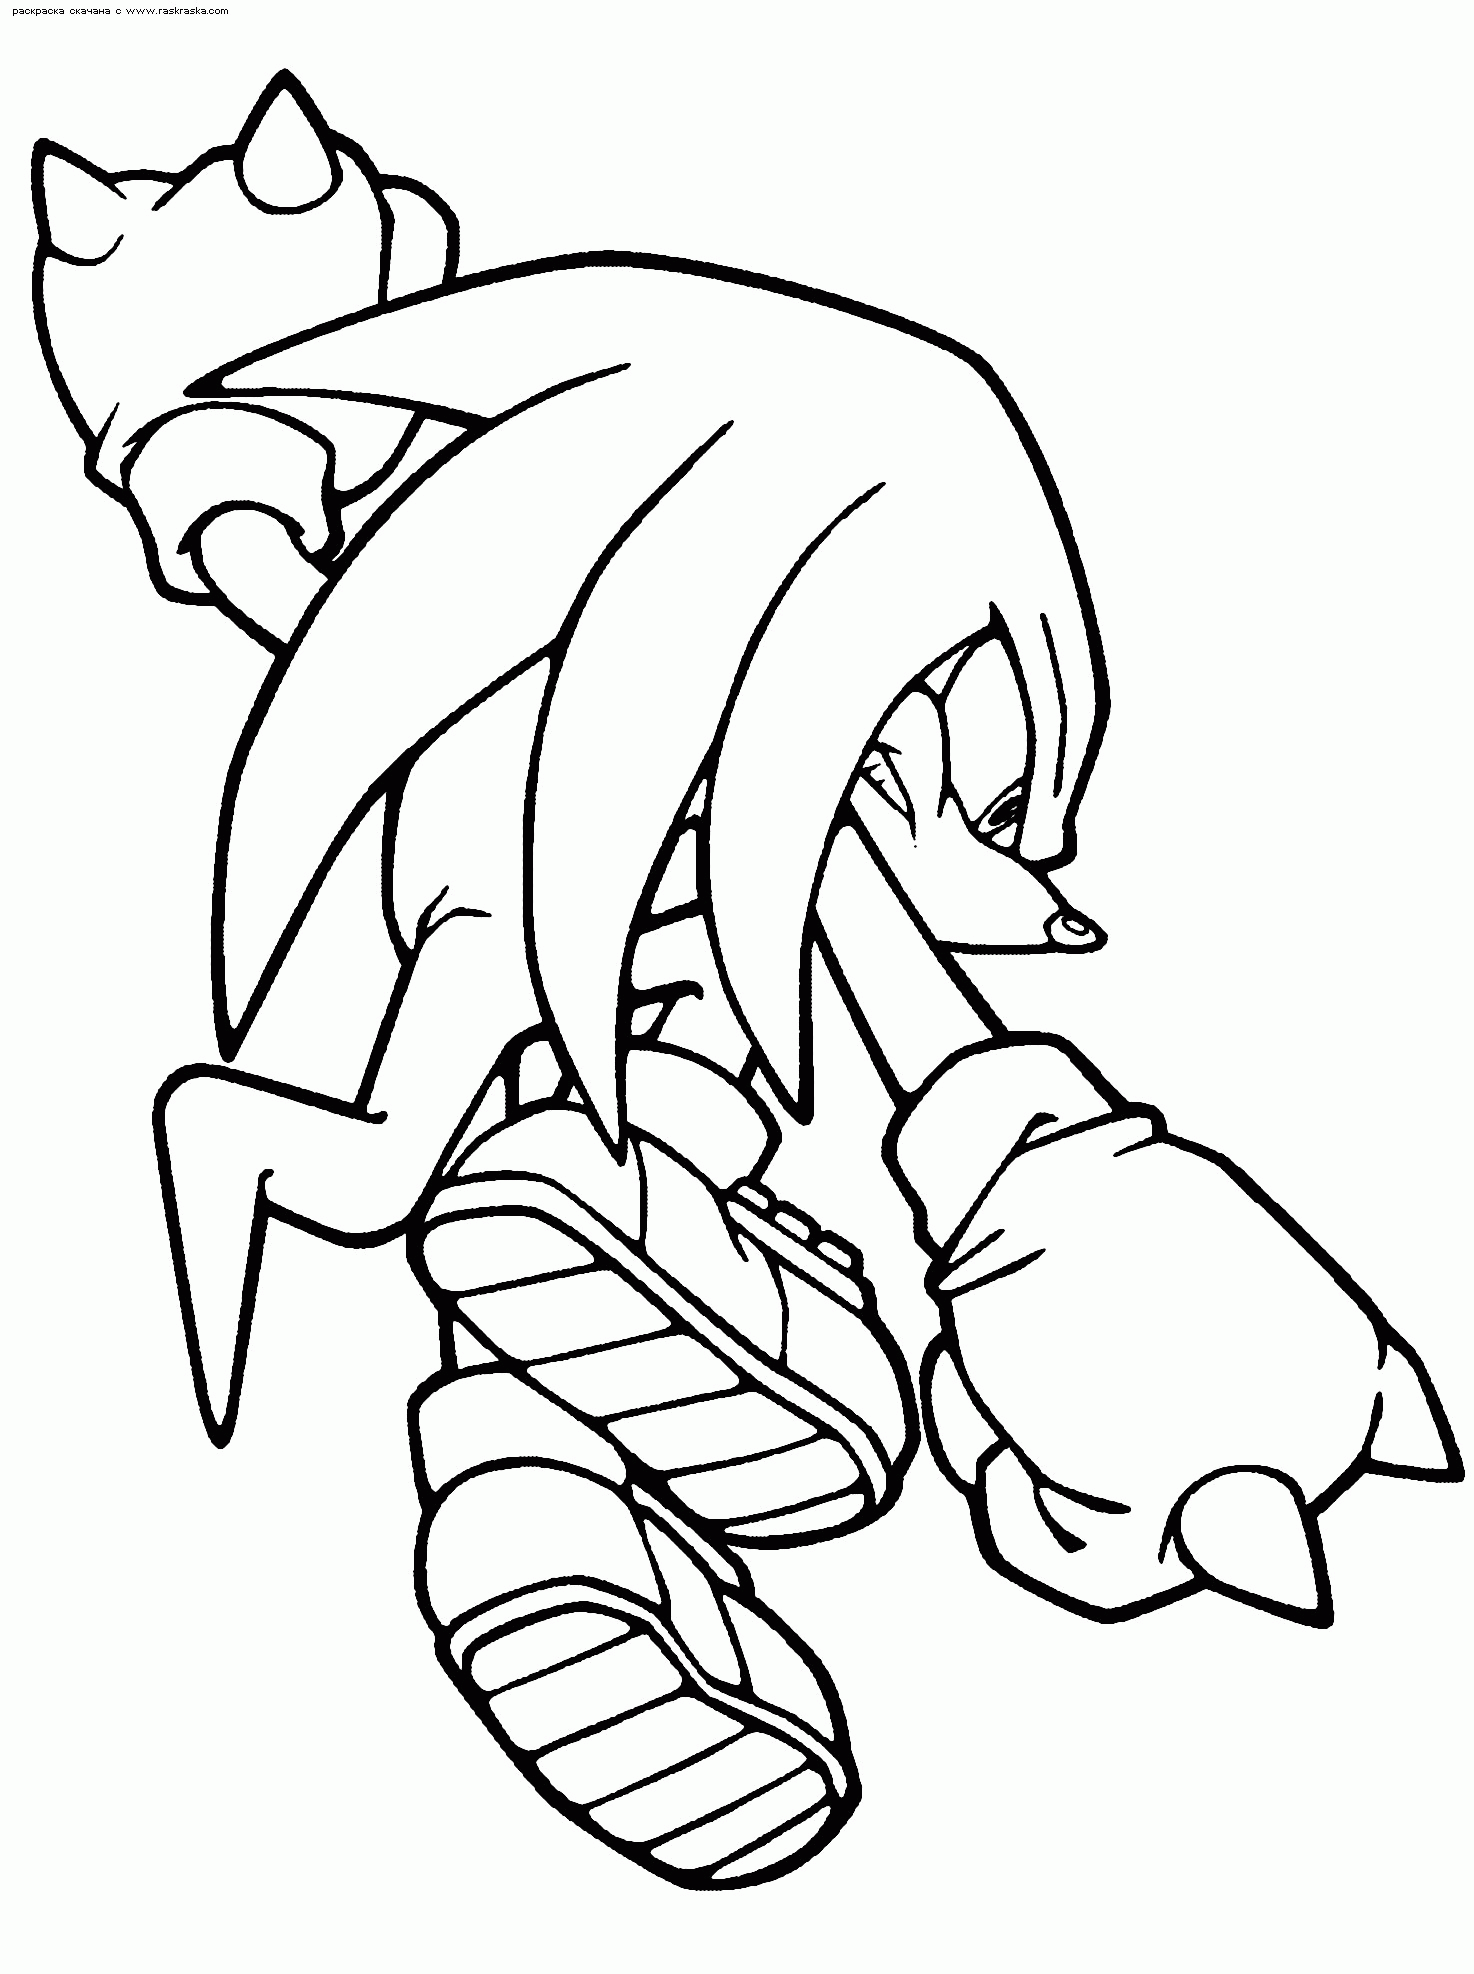 knuckles and sonic coloring pages | Best Coloring Page Site